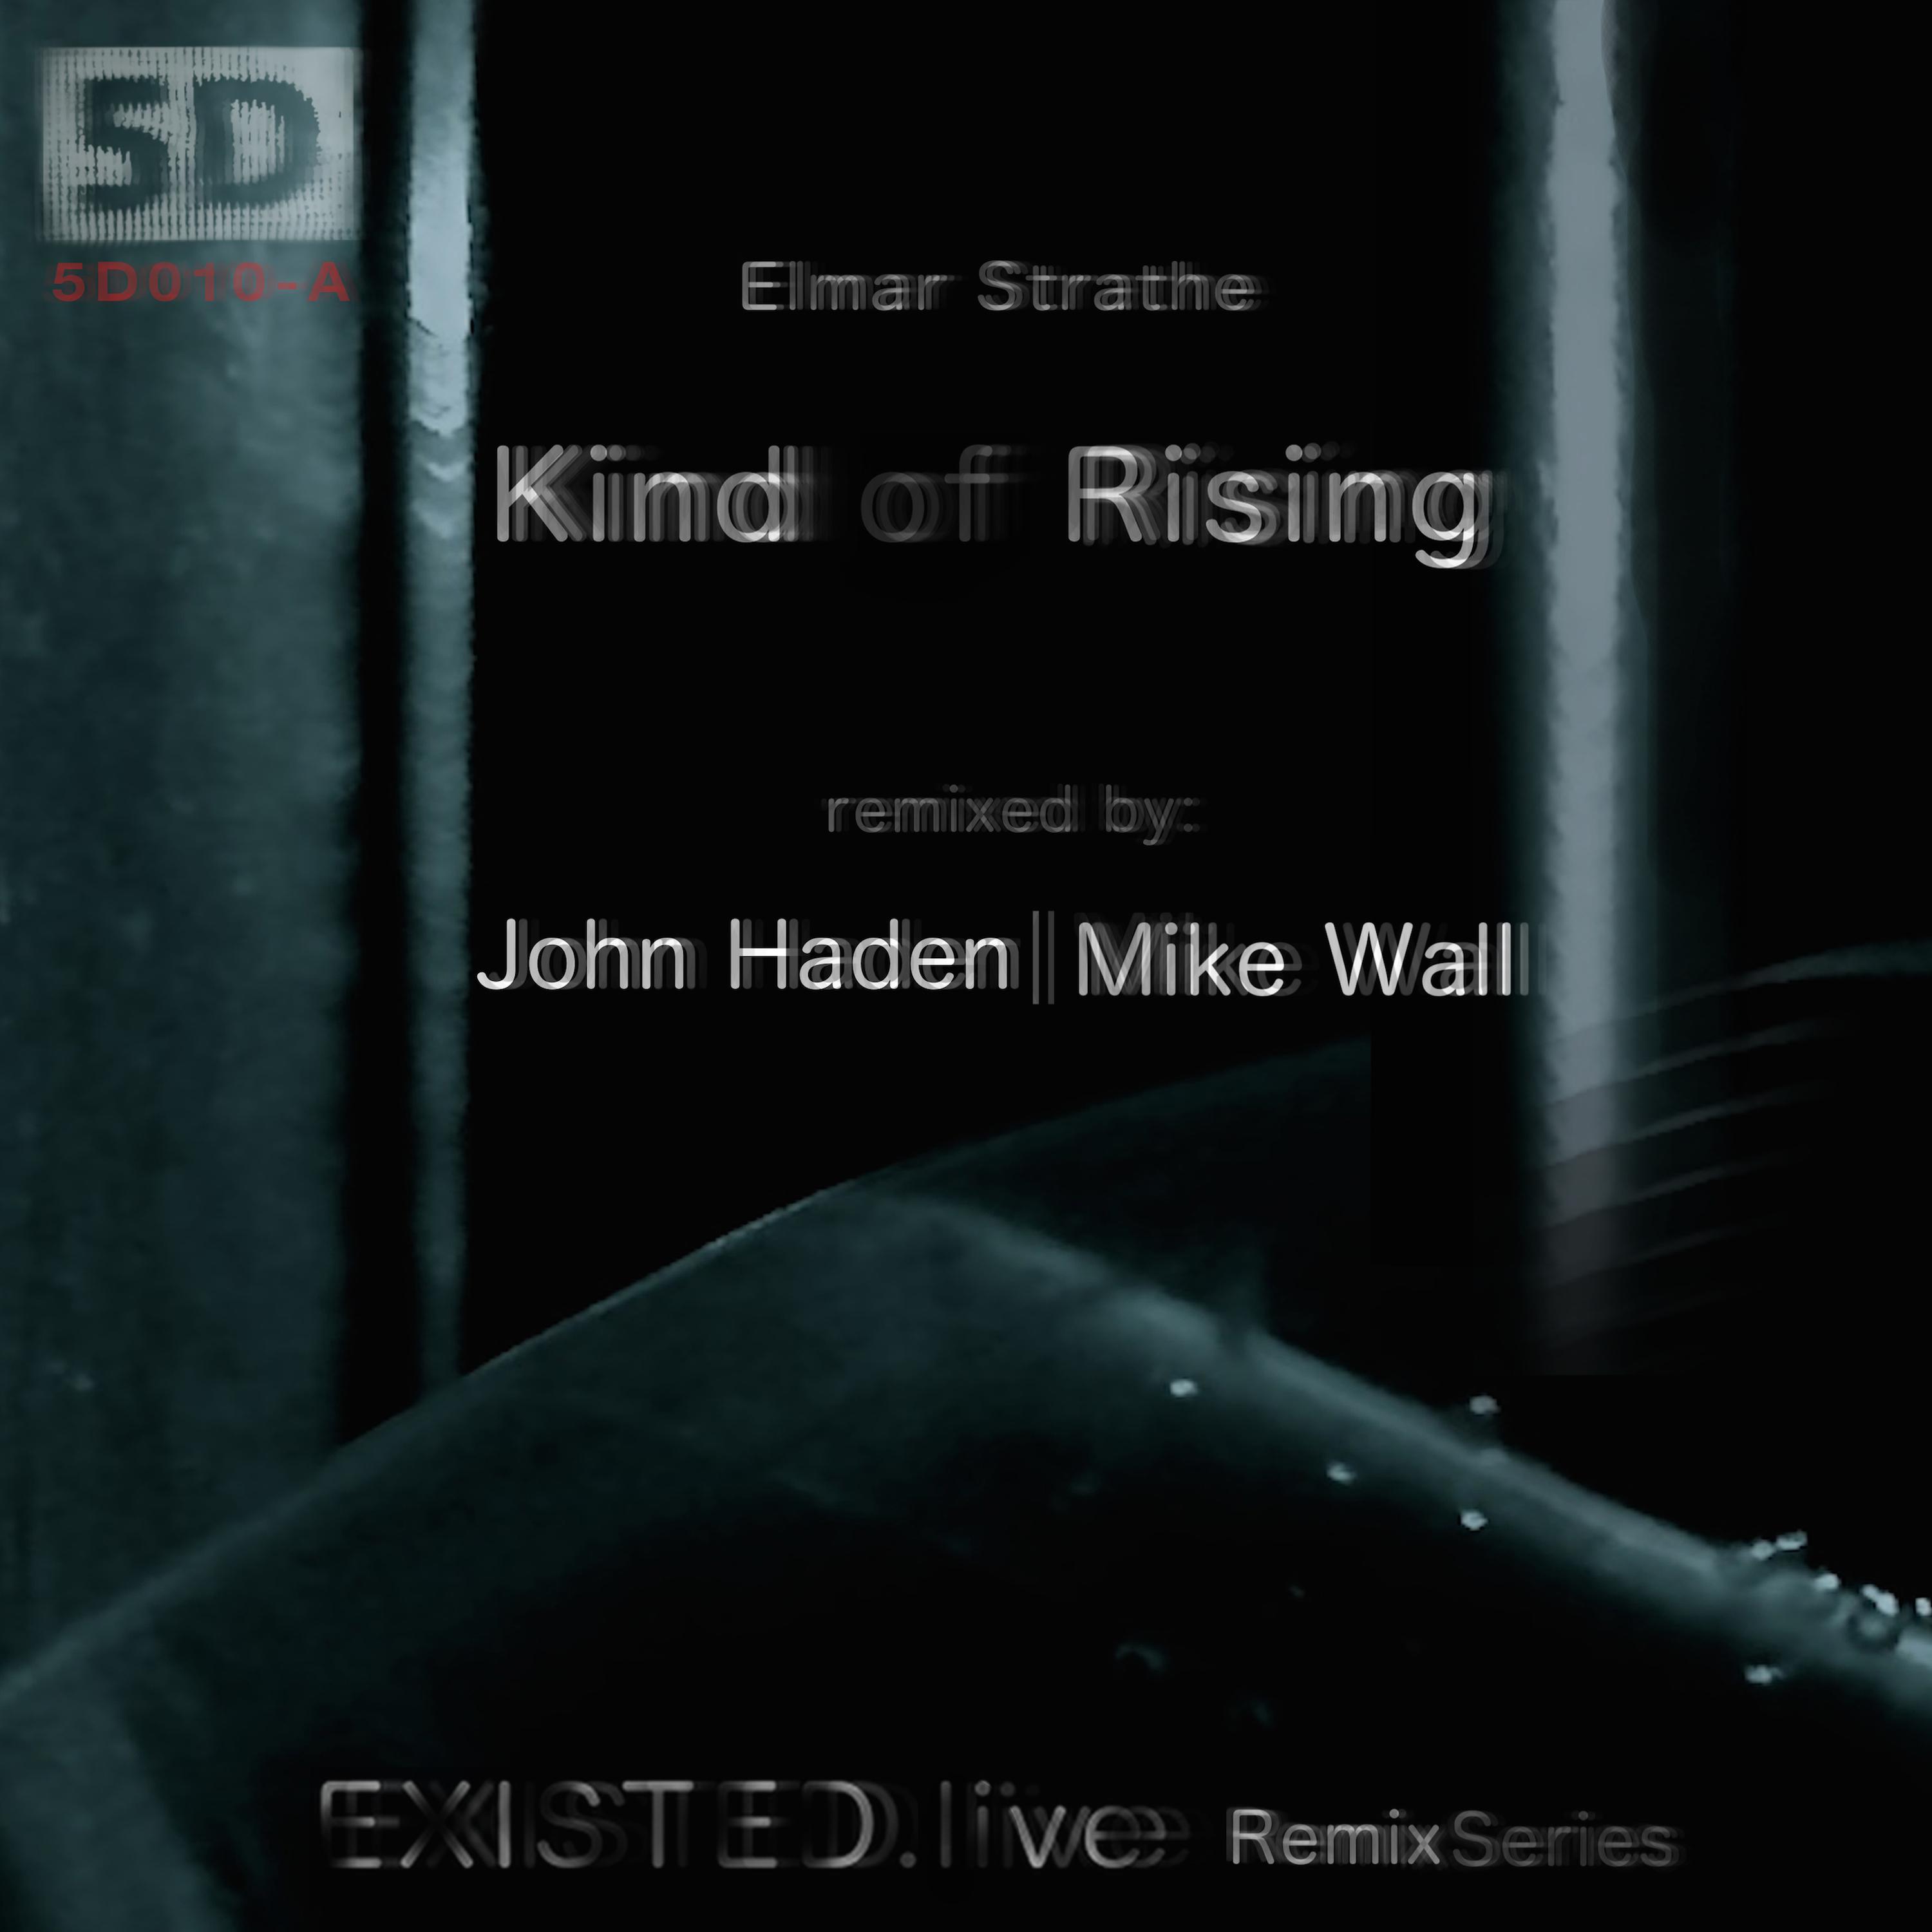 Kind of Rising (Mike Wall Remix)